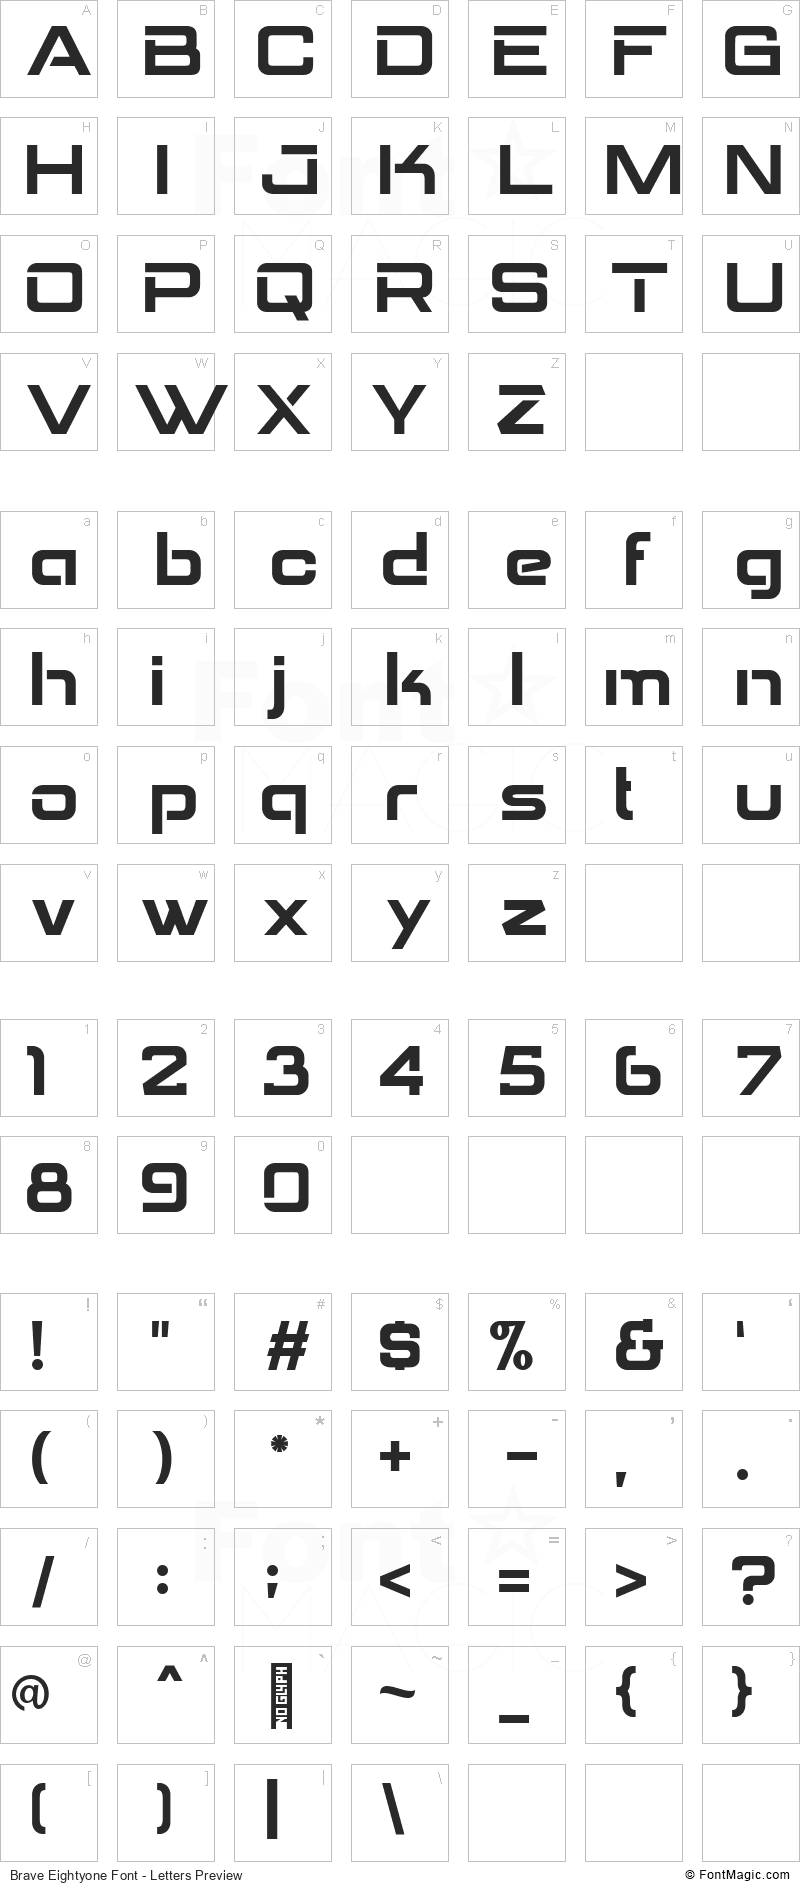 Brave Eightyone Font - All Latters Preview Chart